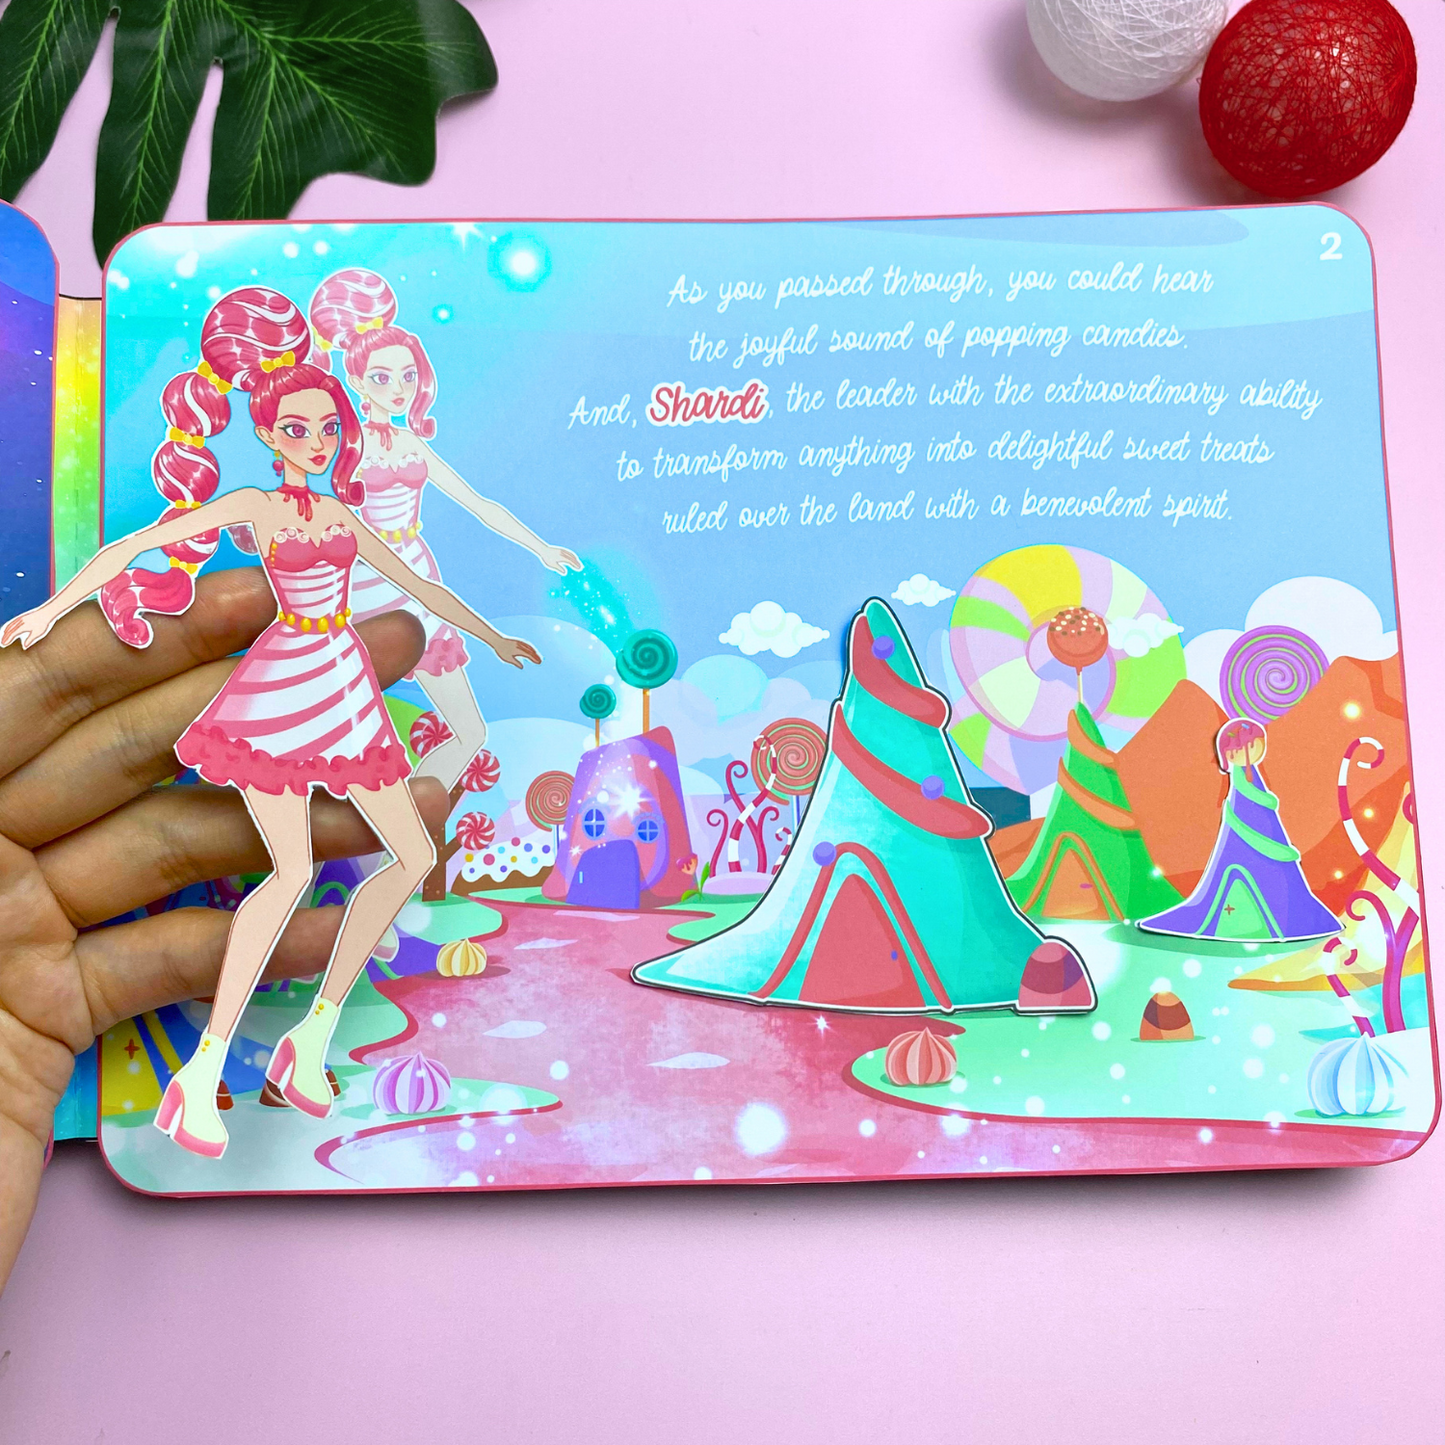 Fairy Tale Princess Book x DIY Activity Book Printable 🍭 Comic Book Gift - Princess Story Book - Christmas Gifts for girls